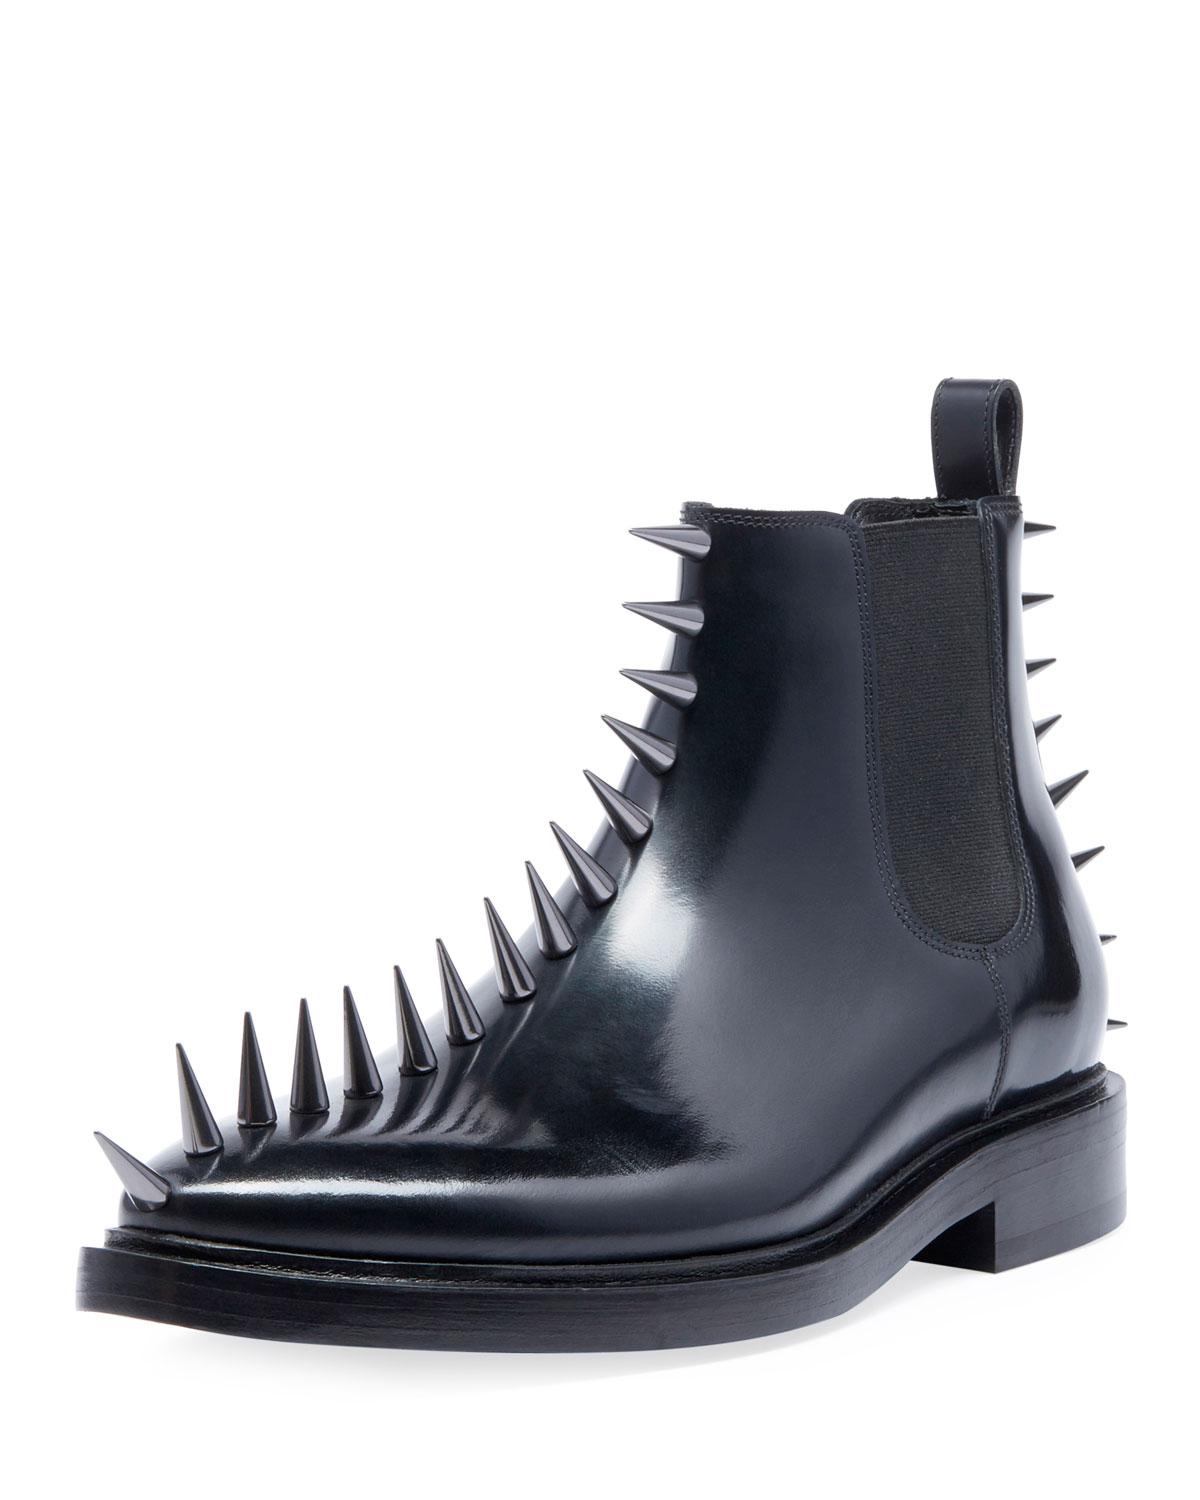 Balenciaga Men's Spikes Leather Combat Boots in Black for